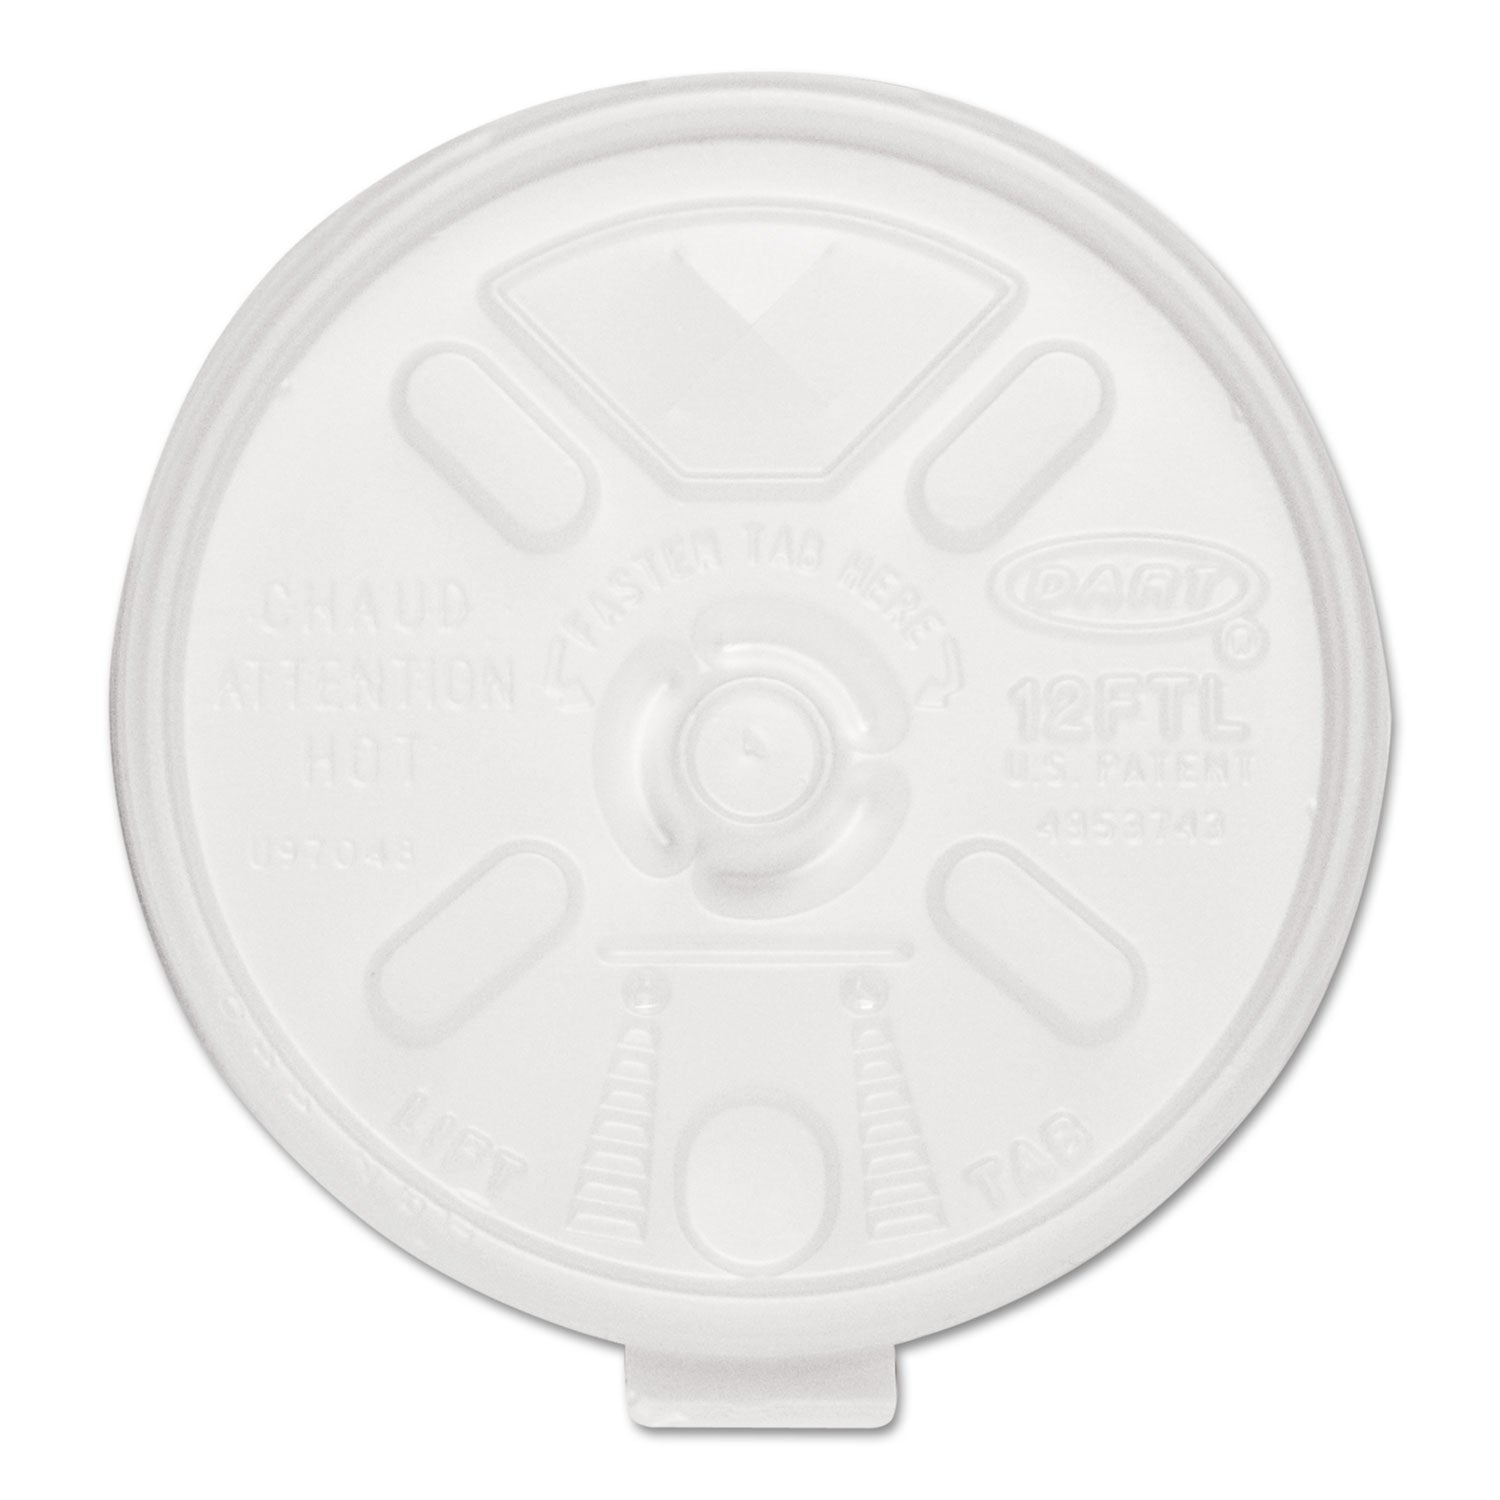 Lift n' Lock Plastic Hot Cup Lids, With Straw Slot, Fits 10 oz to 14 oz Cups, Translucent, 100/Sleeve, 10 Sleeves/Carton - 